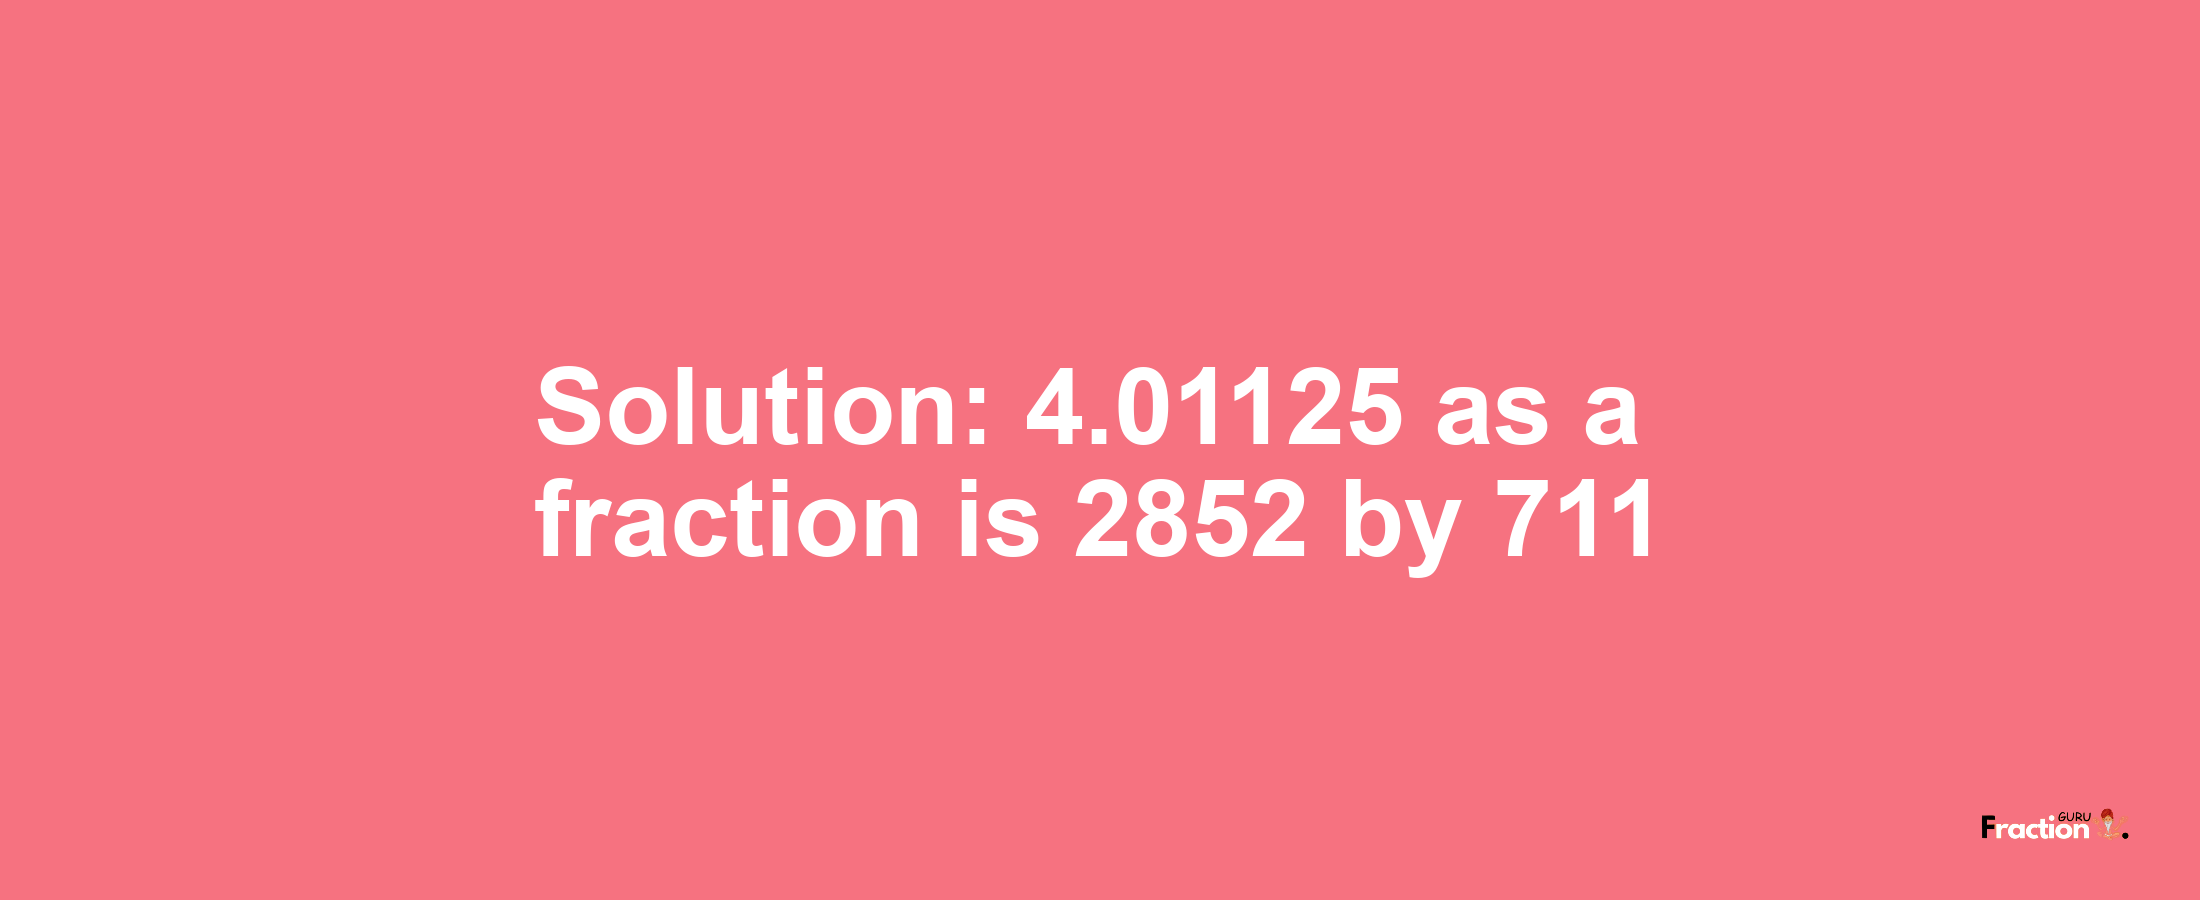 Solution:4.01125 as a fraction is 2852/711